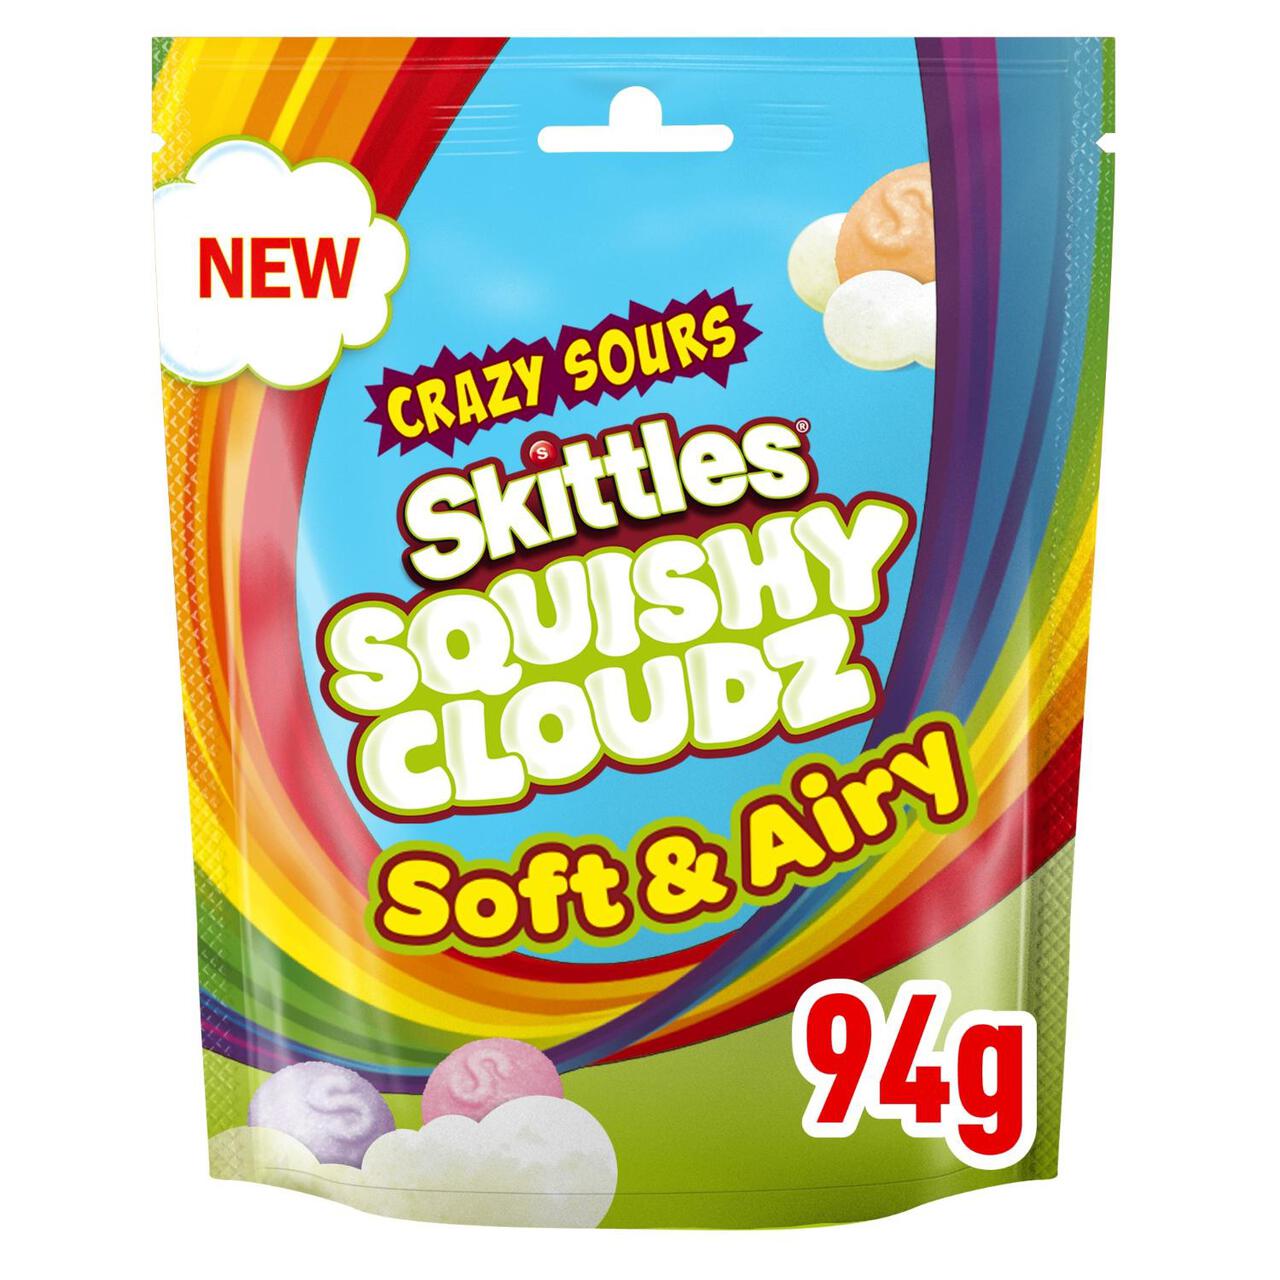 Skittles Squishy Cloudz Sour Sweets Fruit Flavoured  Sweets Pouch Bag 94g 94g